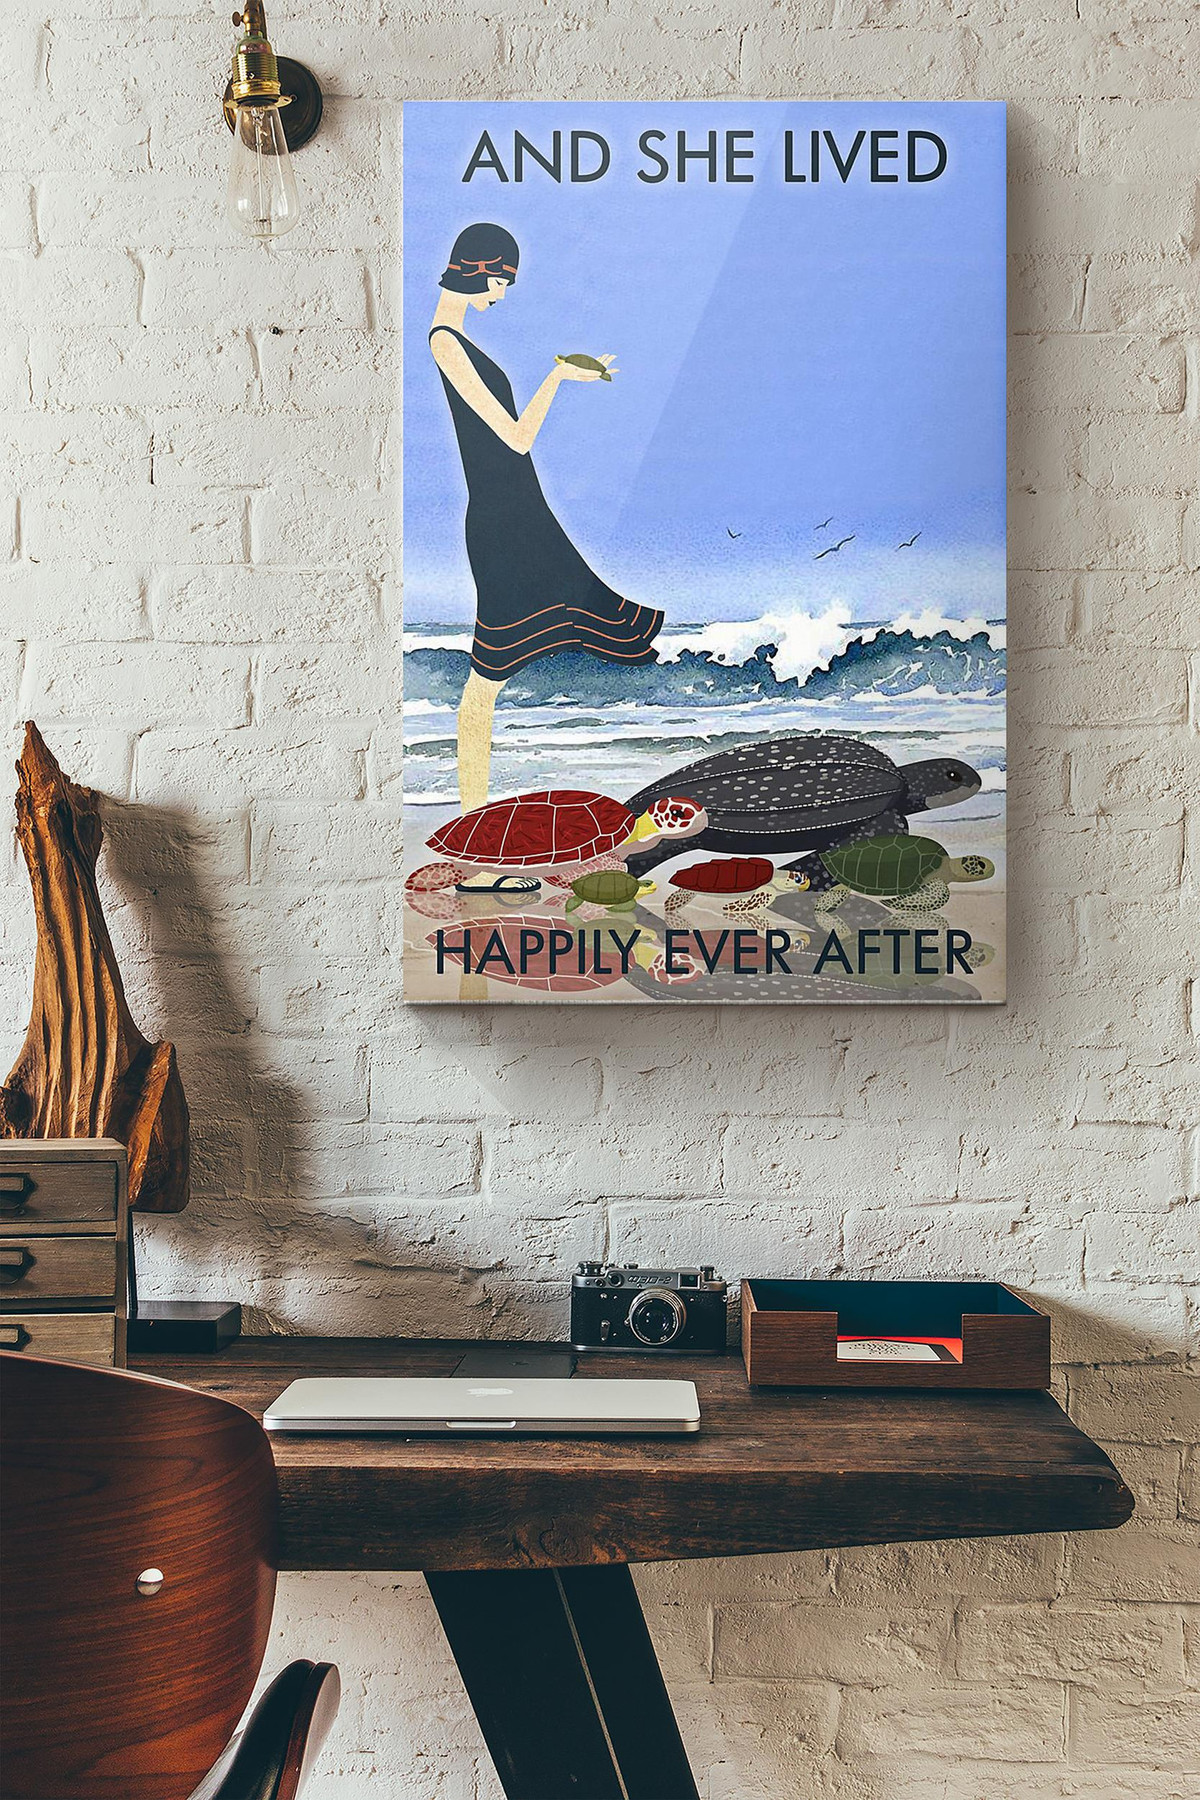 Beach And Turtles And She Lived Happily Ever After Canvas Painting Ideas, Canvas Hanging Prints, Gift Idea Framed Prints, Canvas Paintings Wrapped Canvas 8x10